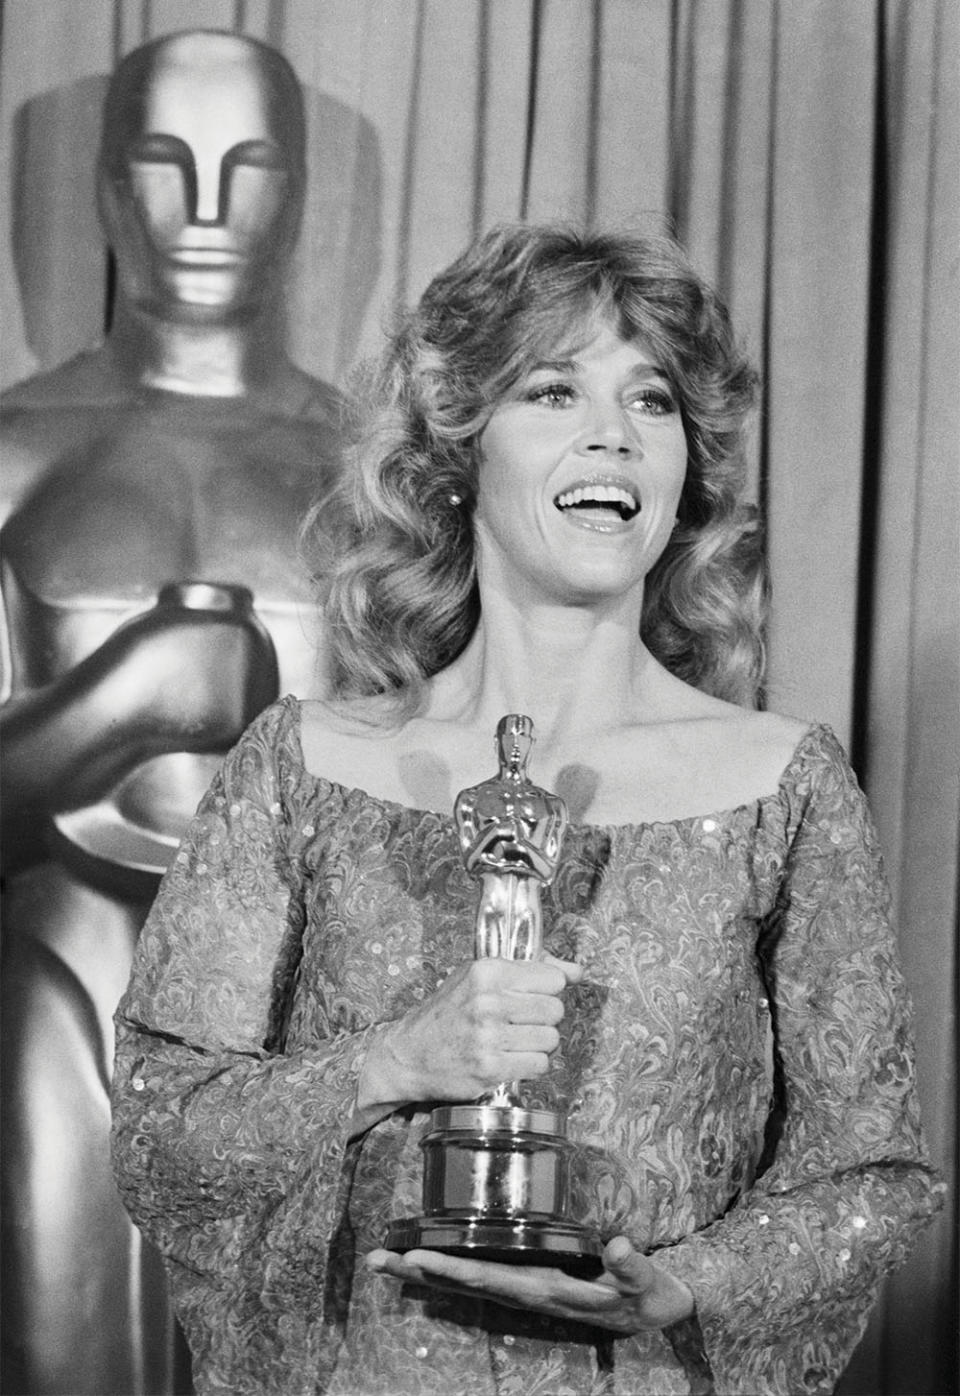 Fonda accepted the 1979 best actress Oscar for Coming Home, which she also produced.